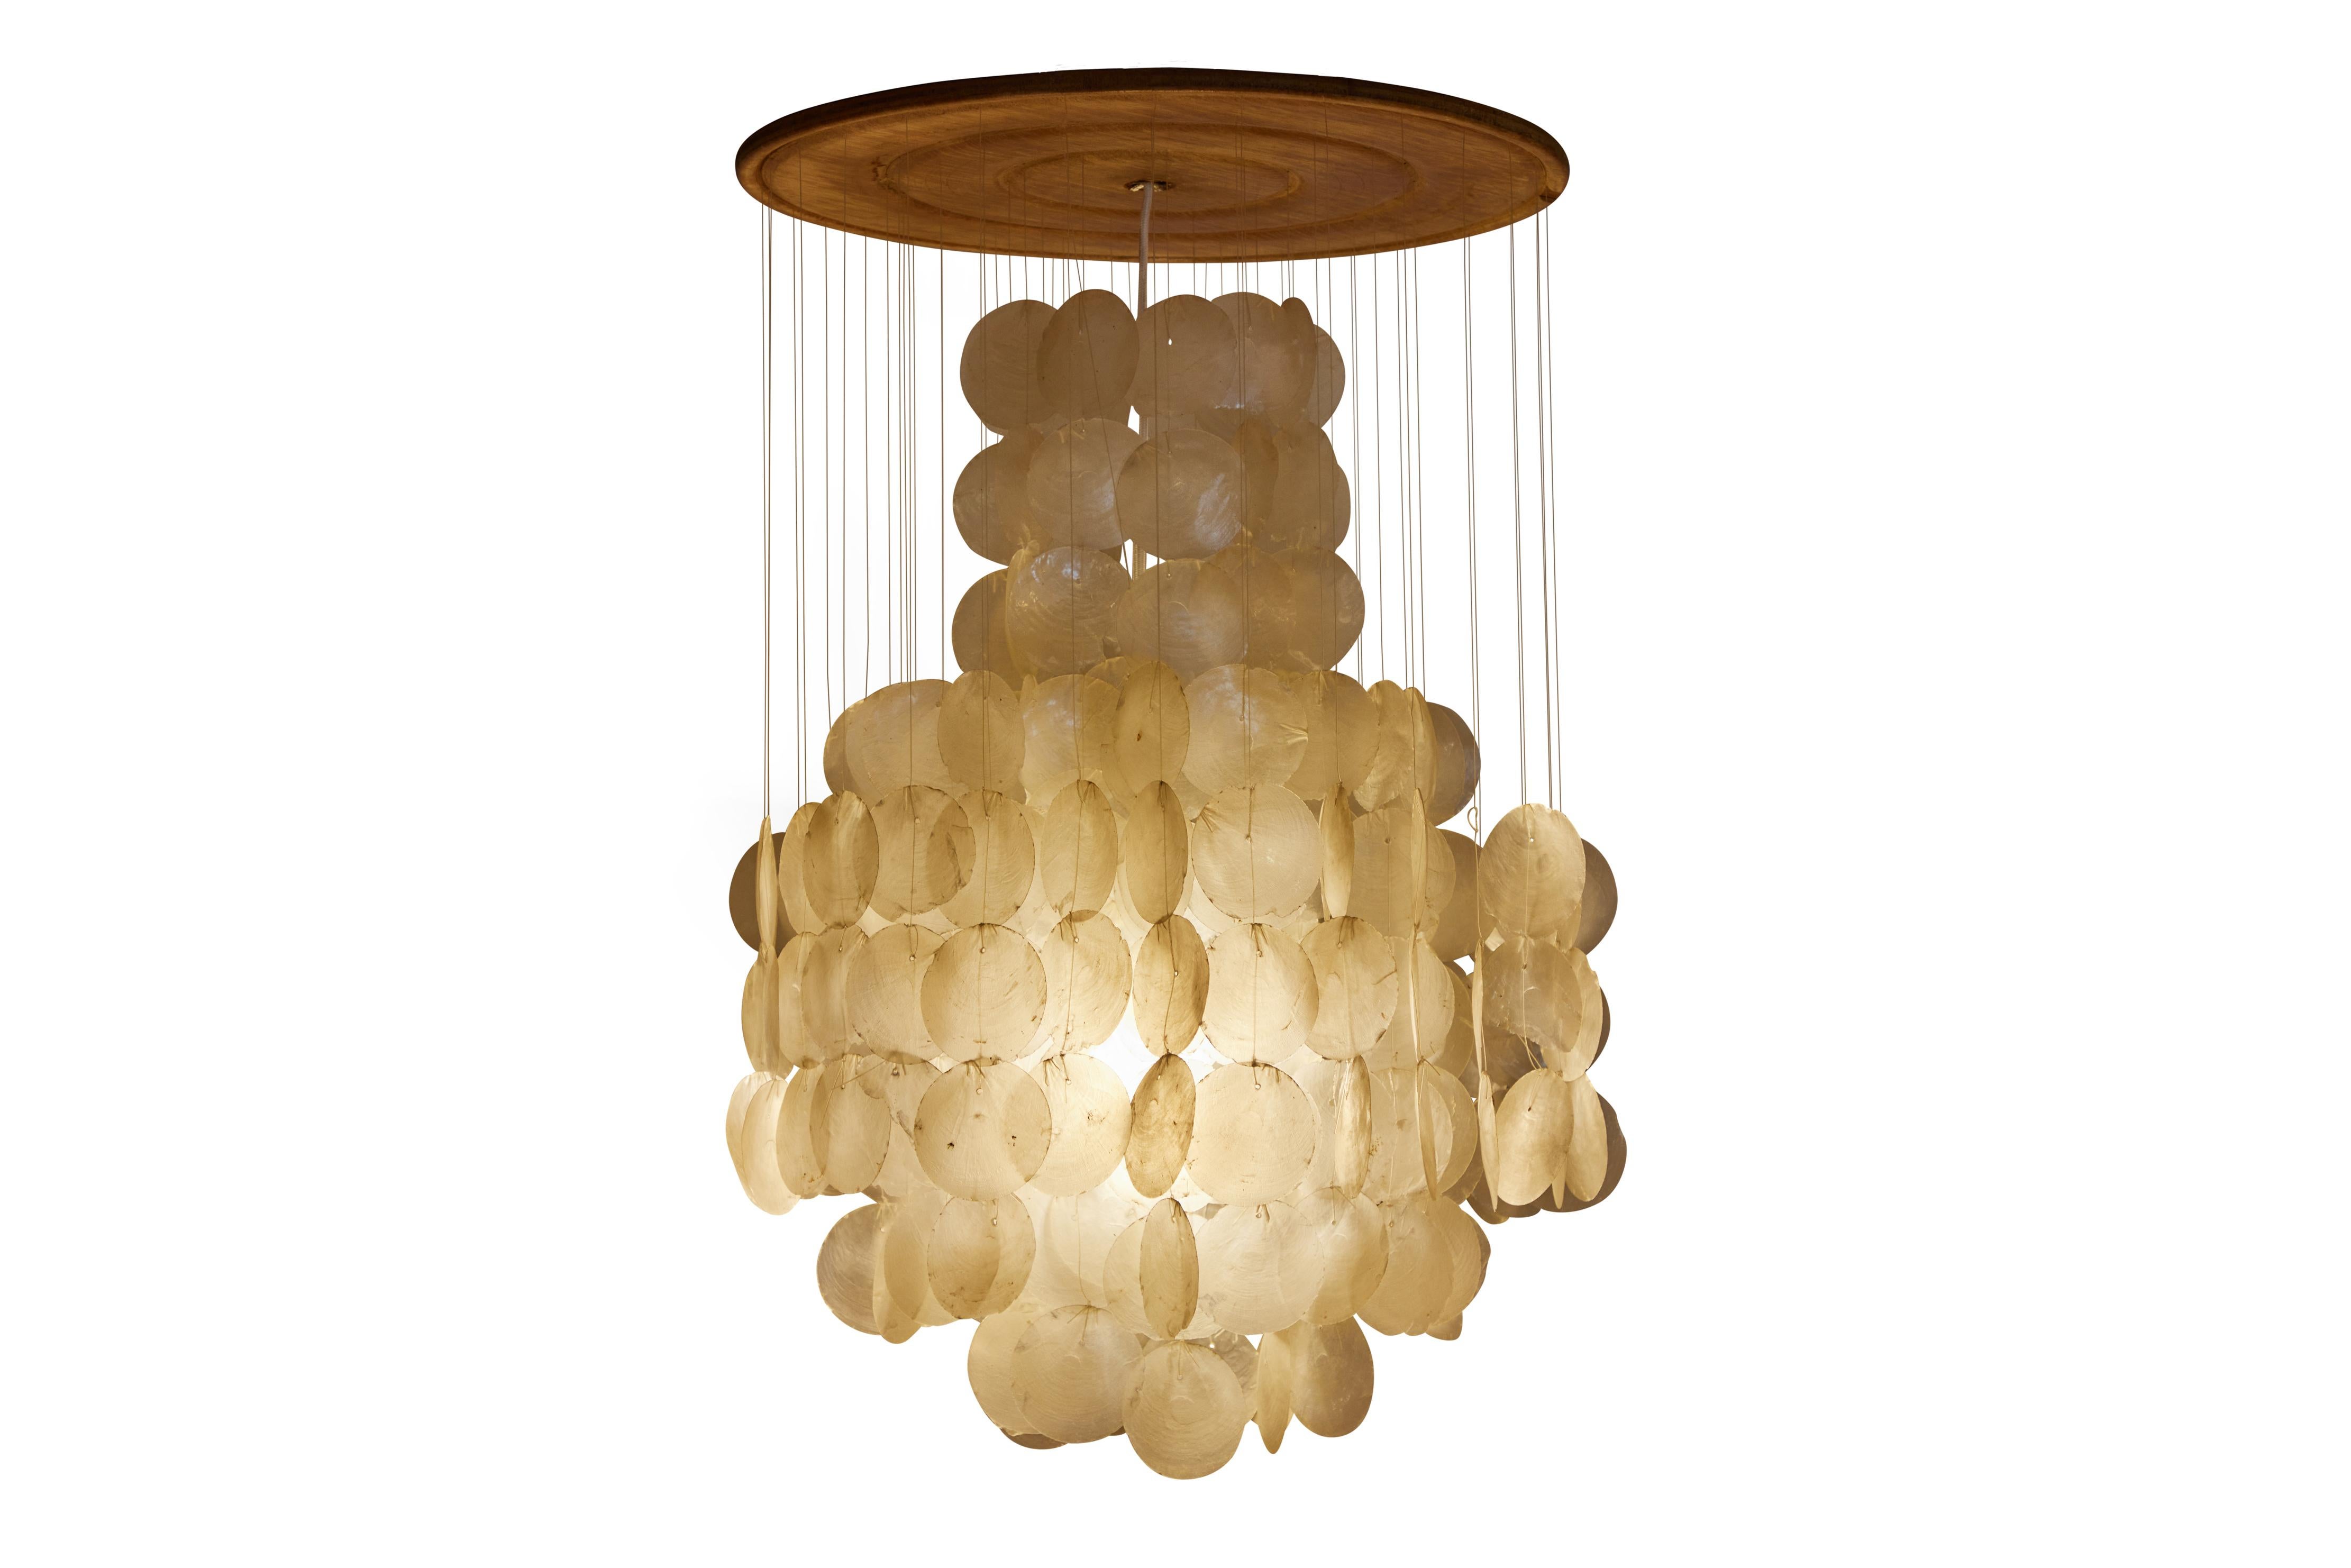 Vintage capiz shell pendant light attributed to Verner Panton circa 1960s.This pendant has a wooden mount piece and one tier of hanging capiz shell discs.